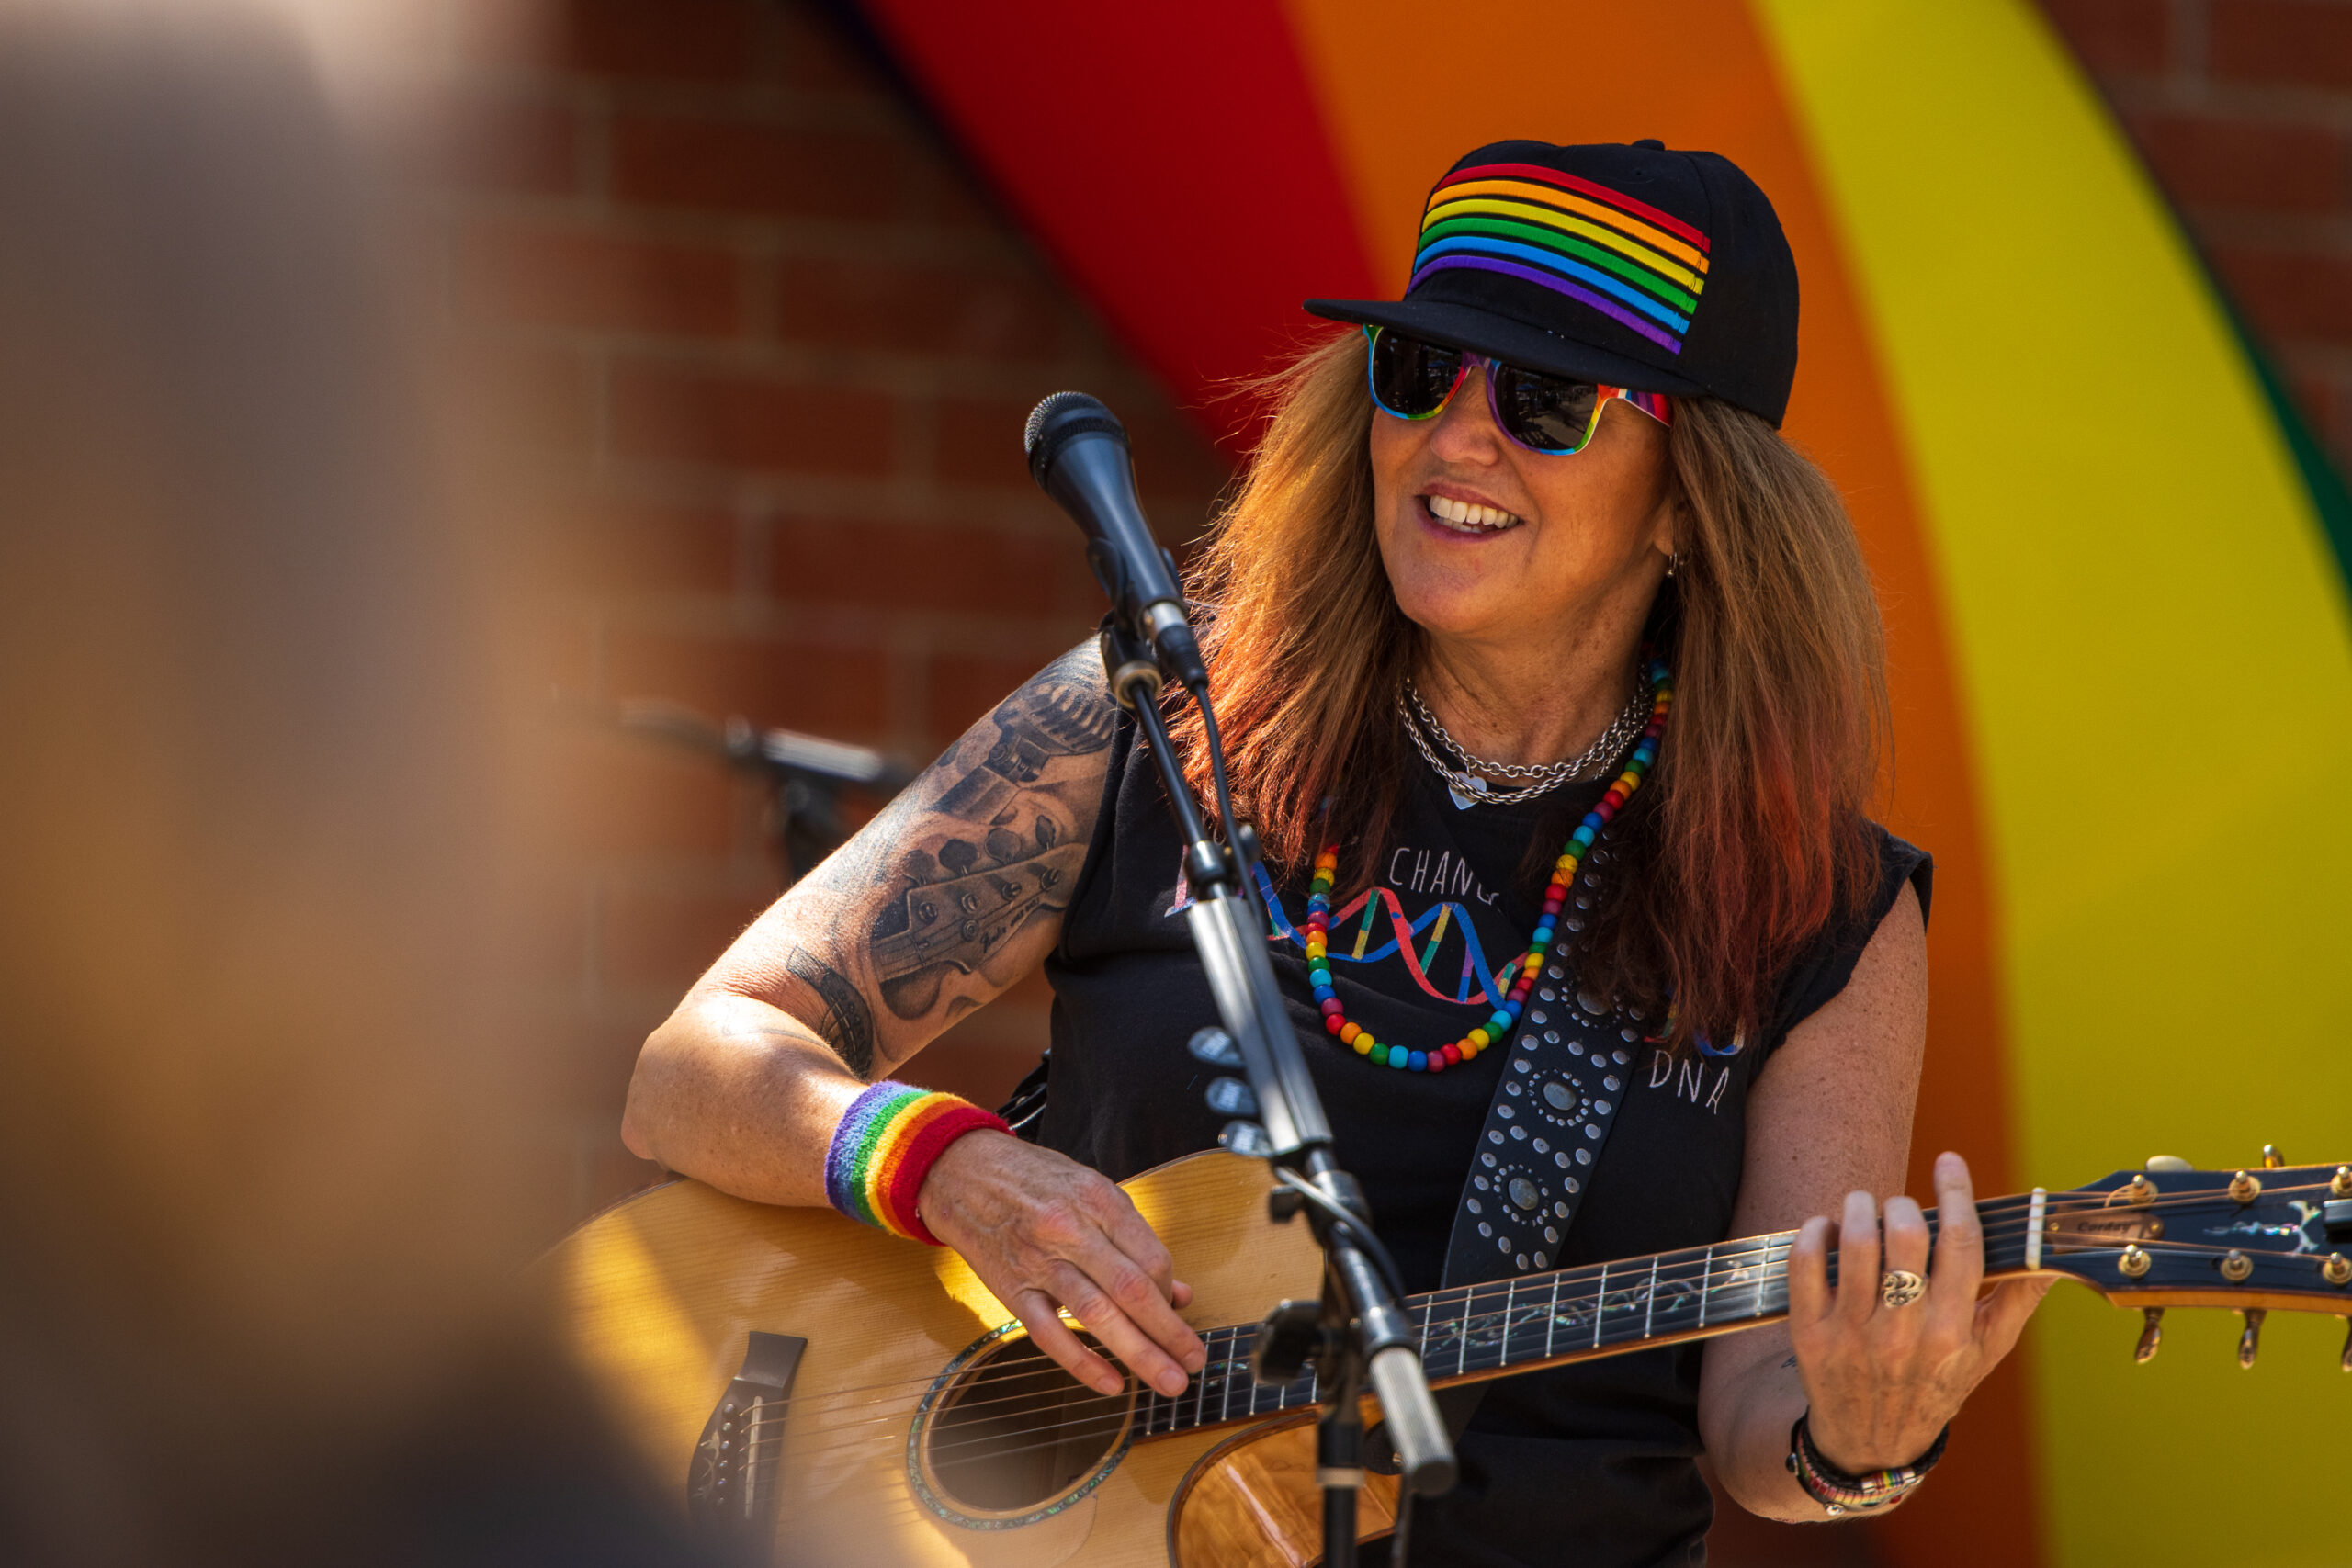 Woman wearing black trucker cap with rainbow and sleeveless black T-shirt plays acoustic guitar on stage.